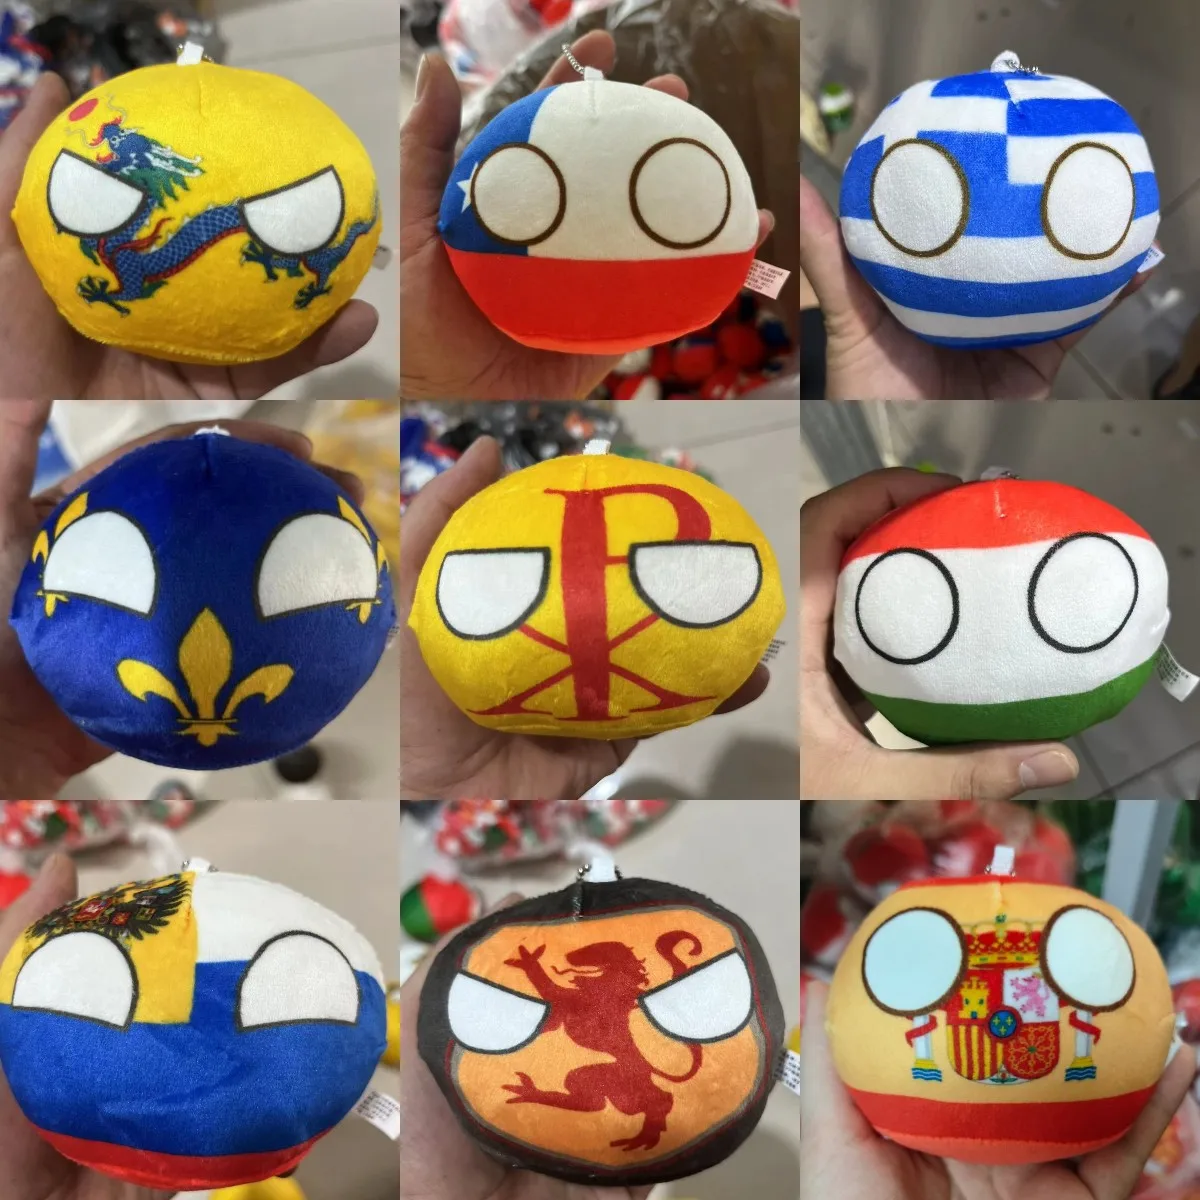 68 styles 10cm Country Ball Plush Toy Polandball Pendant Country Balls Gifts for Children Countryball Stuffed Doll Xmas Gift